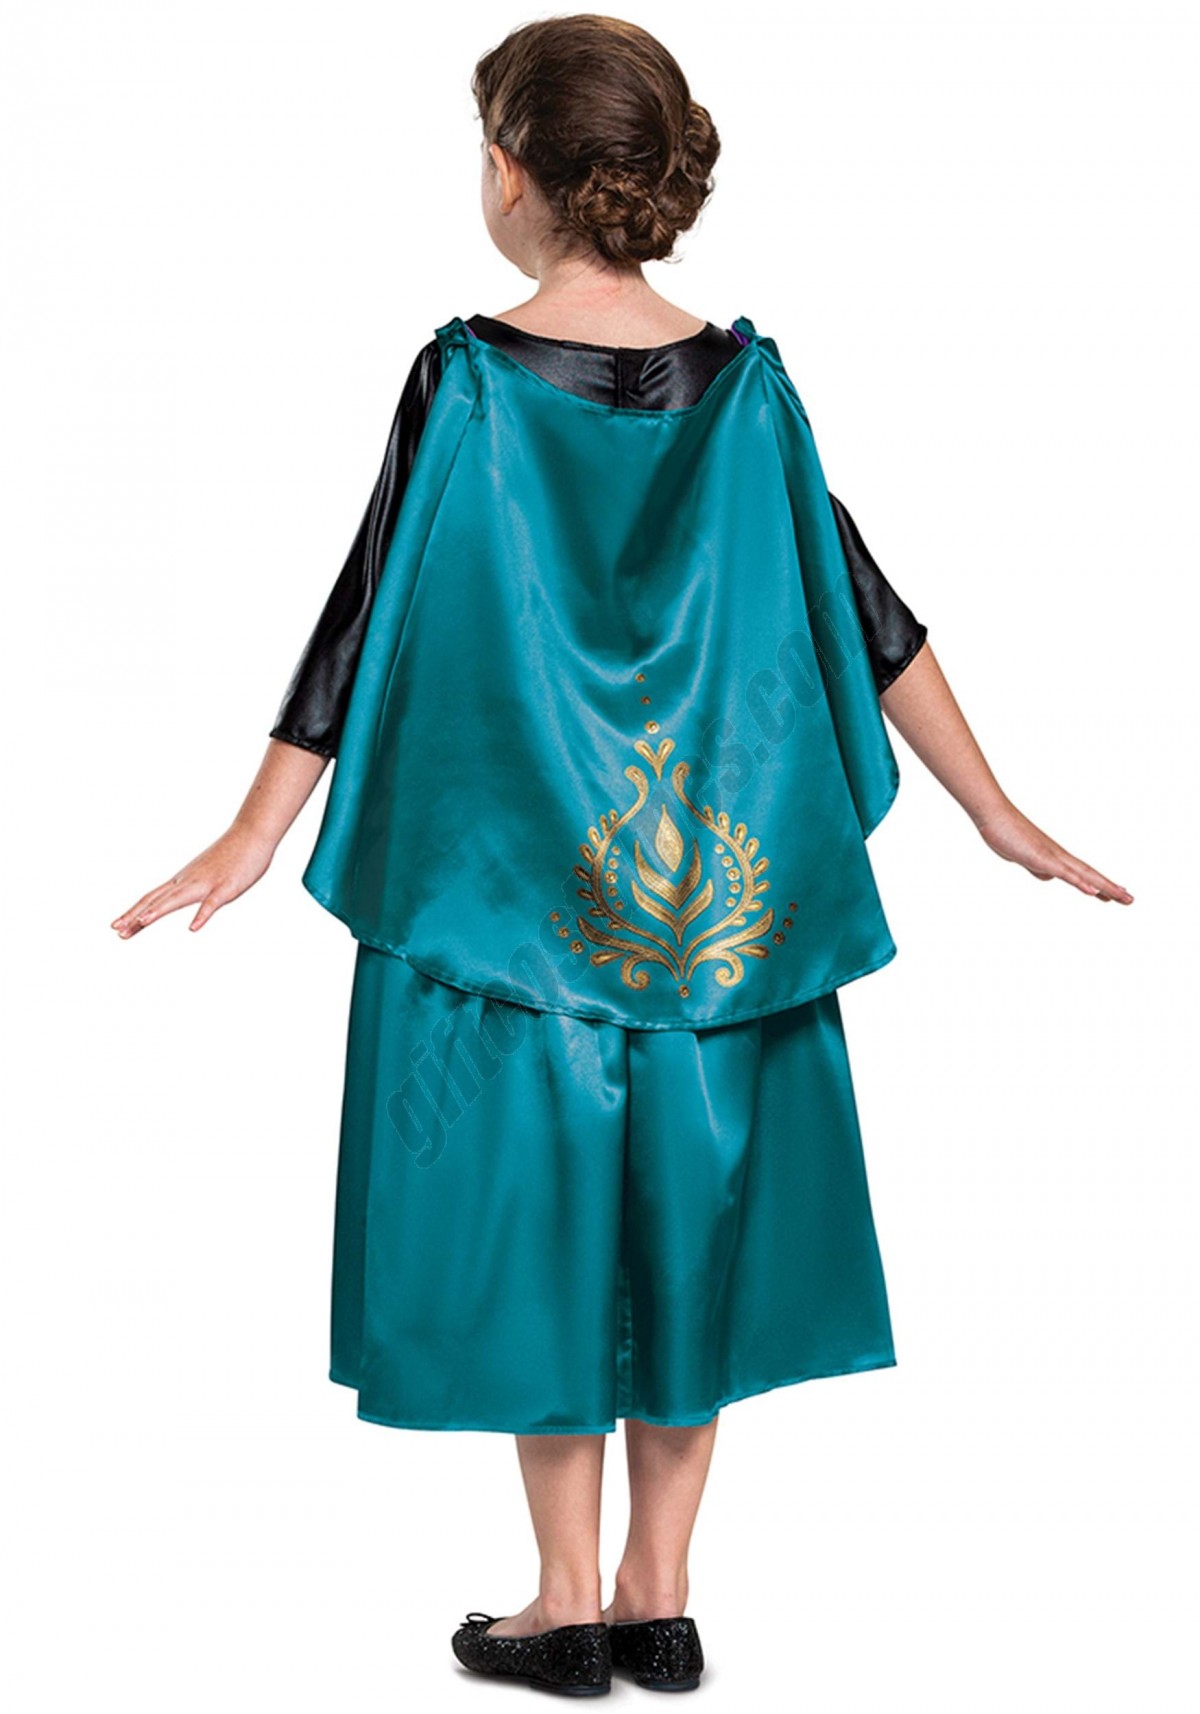 Frozen Queen Anna Classic Costume for Kids Promotions - -1